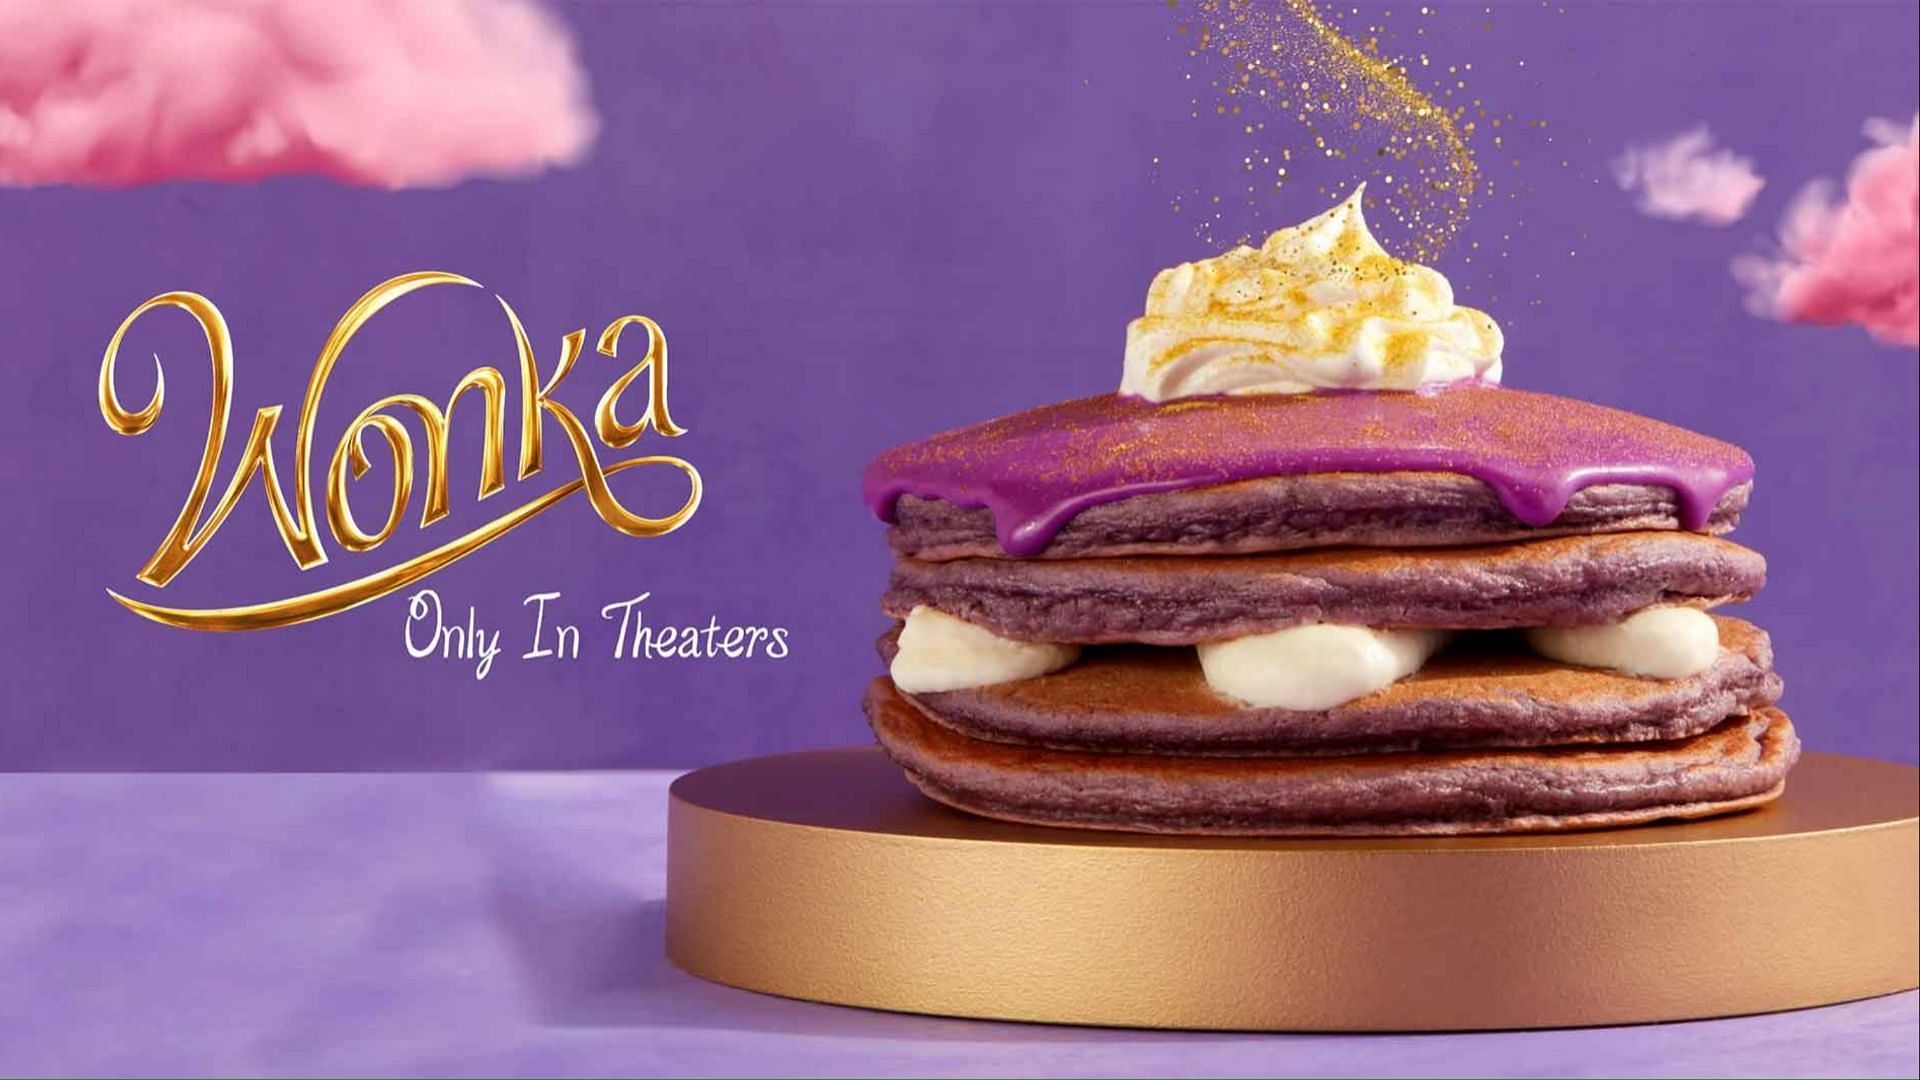 The limited-time time Wonka-inspired menu hits stores starting November 27 (Image via IHOP)